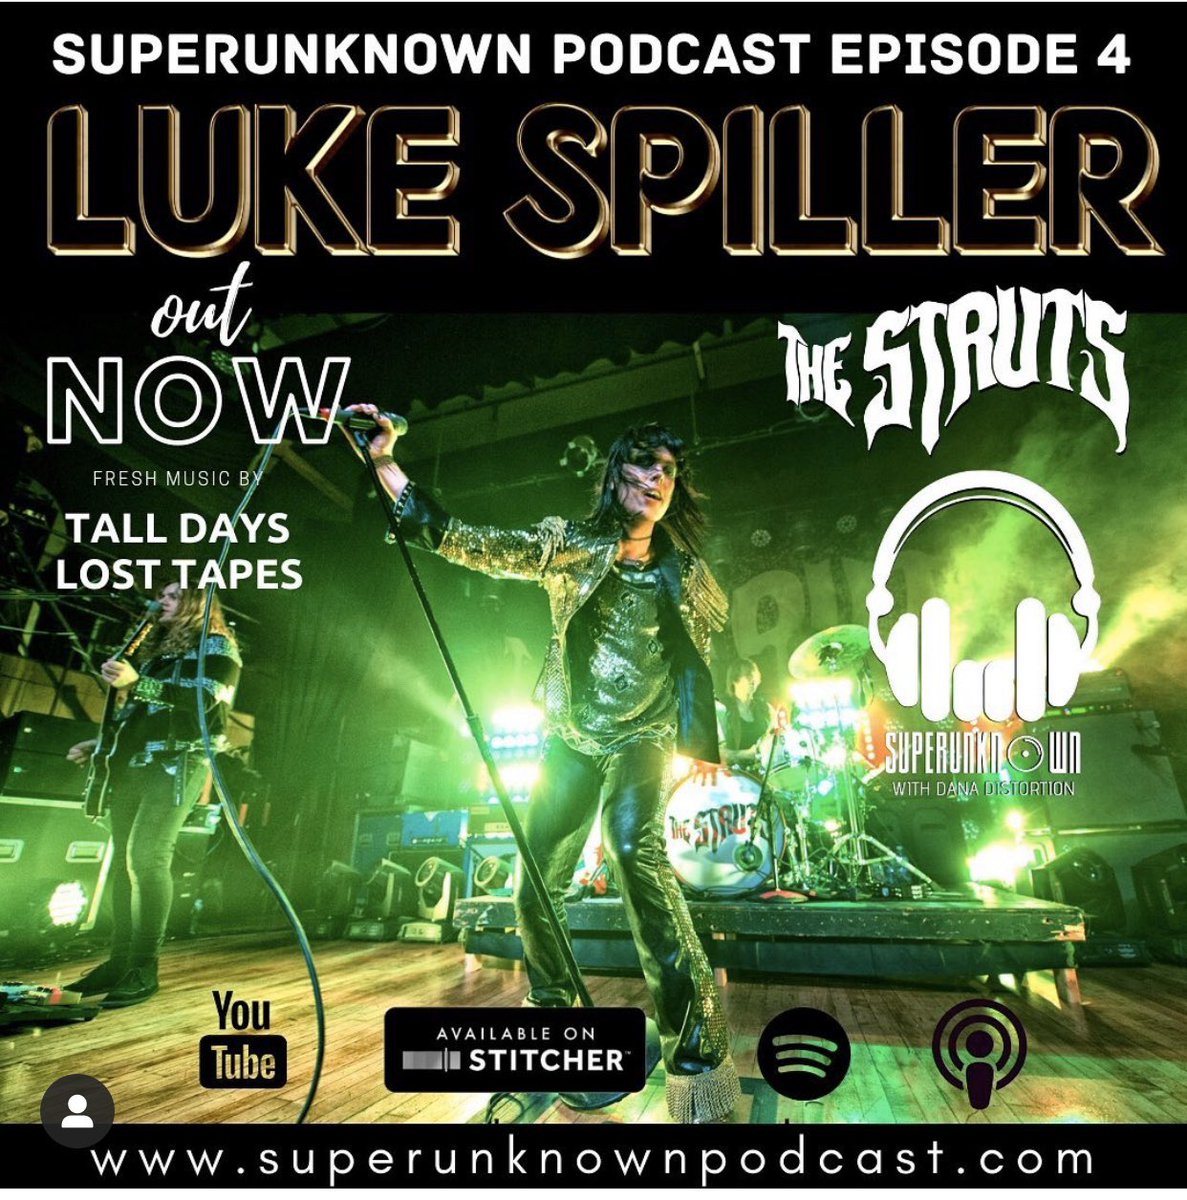 Check out the new episode of @danadistortion’s excellent music podcast, Superunknown, featuring our song, “Hey There Man” & Luke from @TheStruts 

#MusicPod #thestruts #superunknown #newpodcast #rocknroll